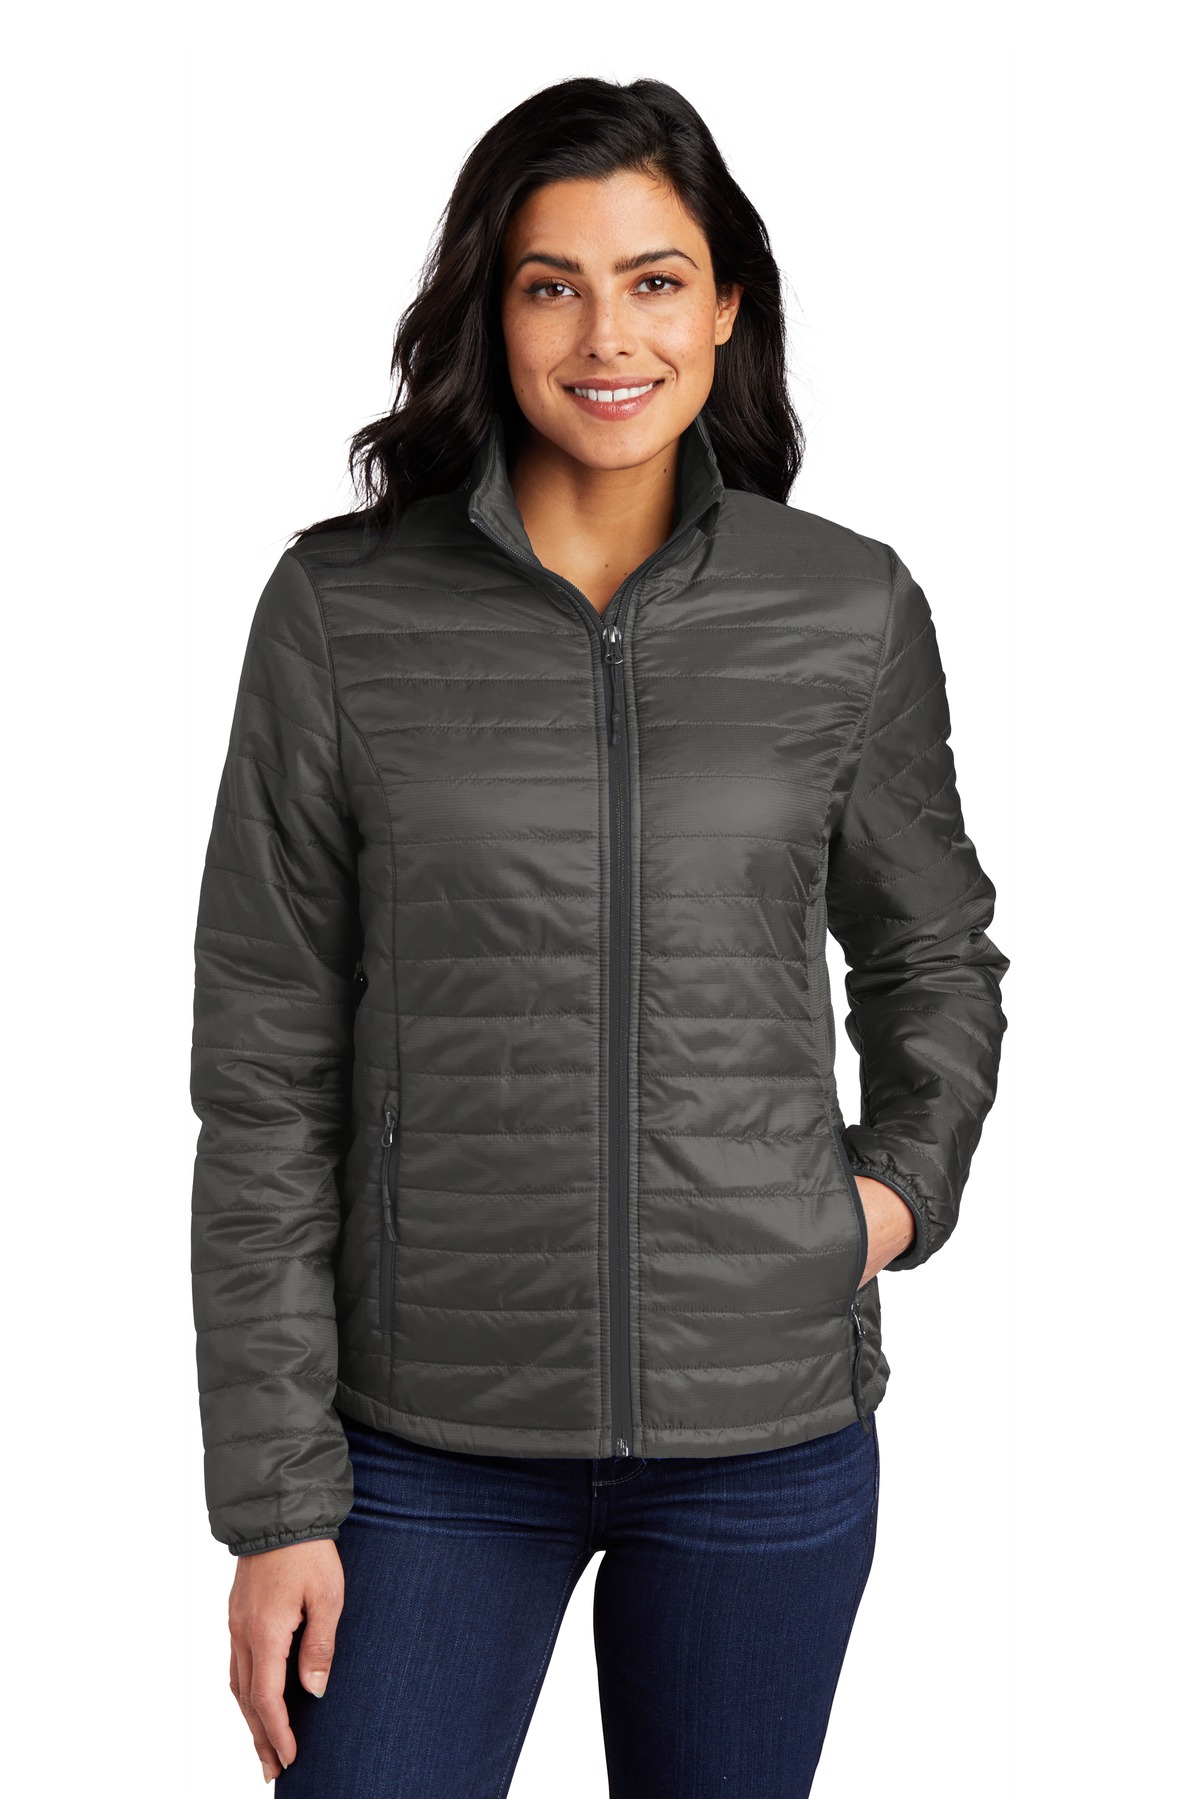 Port Authority Ladies Packable Puffy Jacket L850